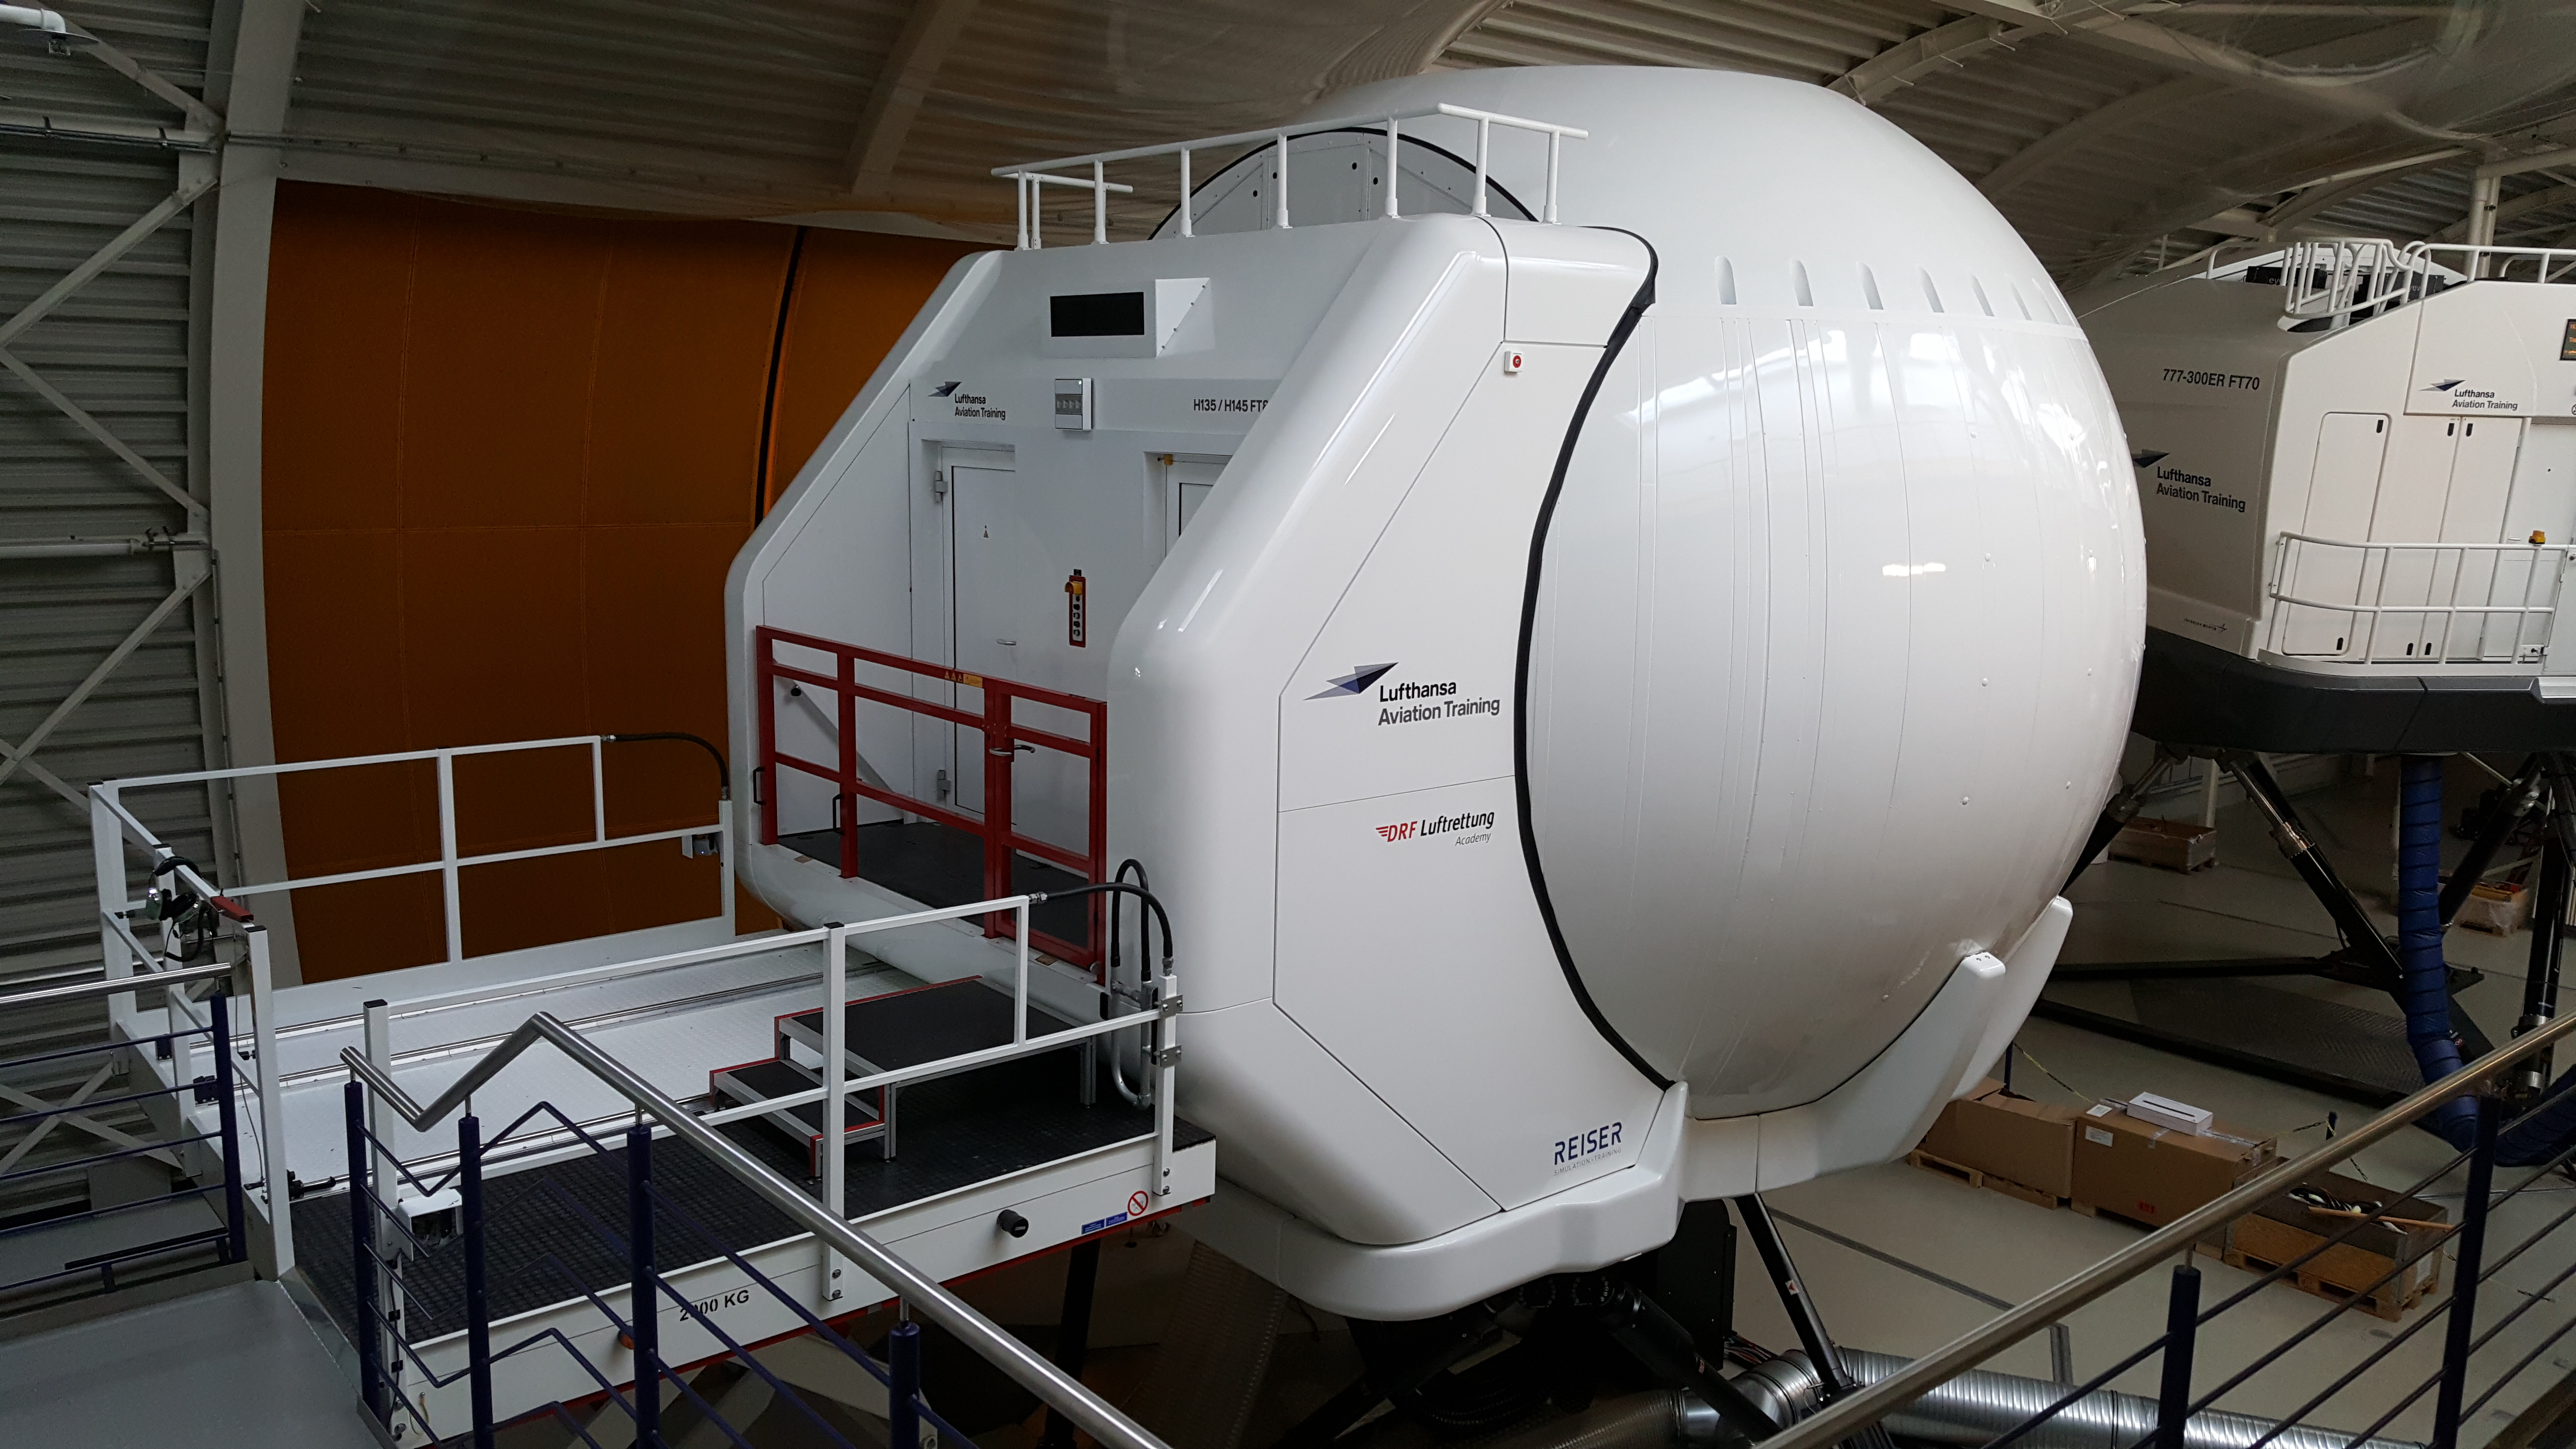 Airbus Helicopter SIM